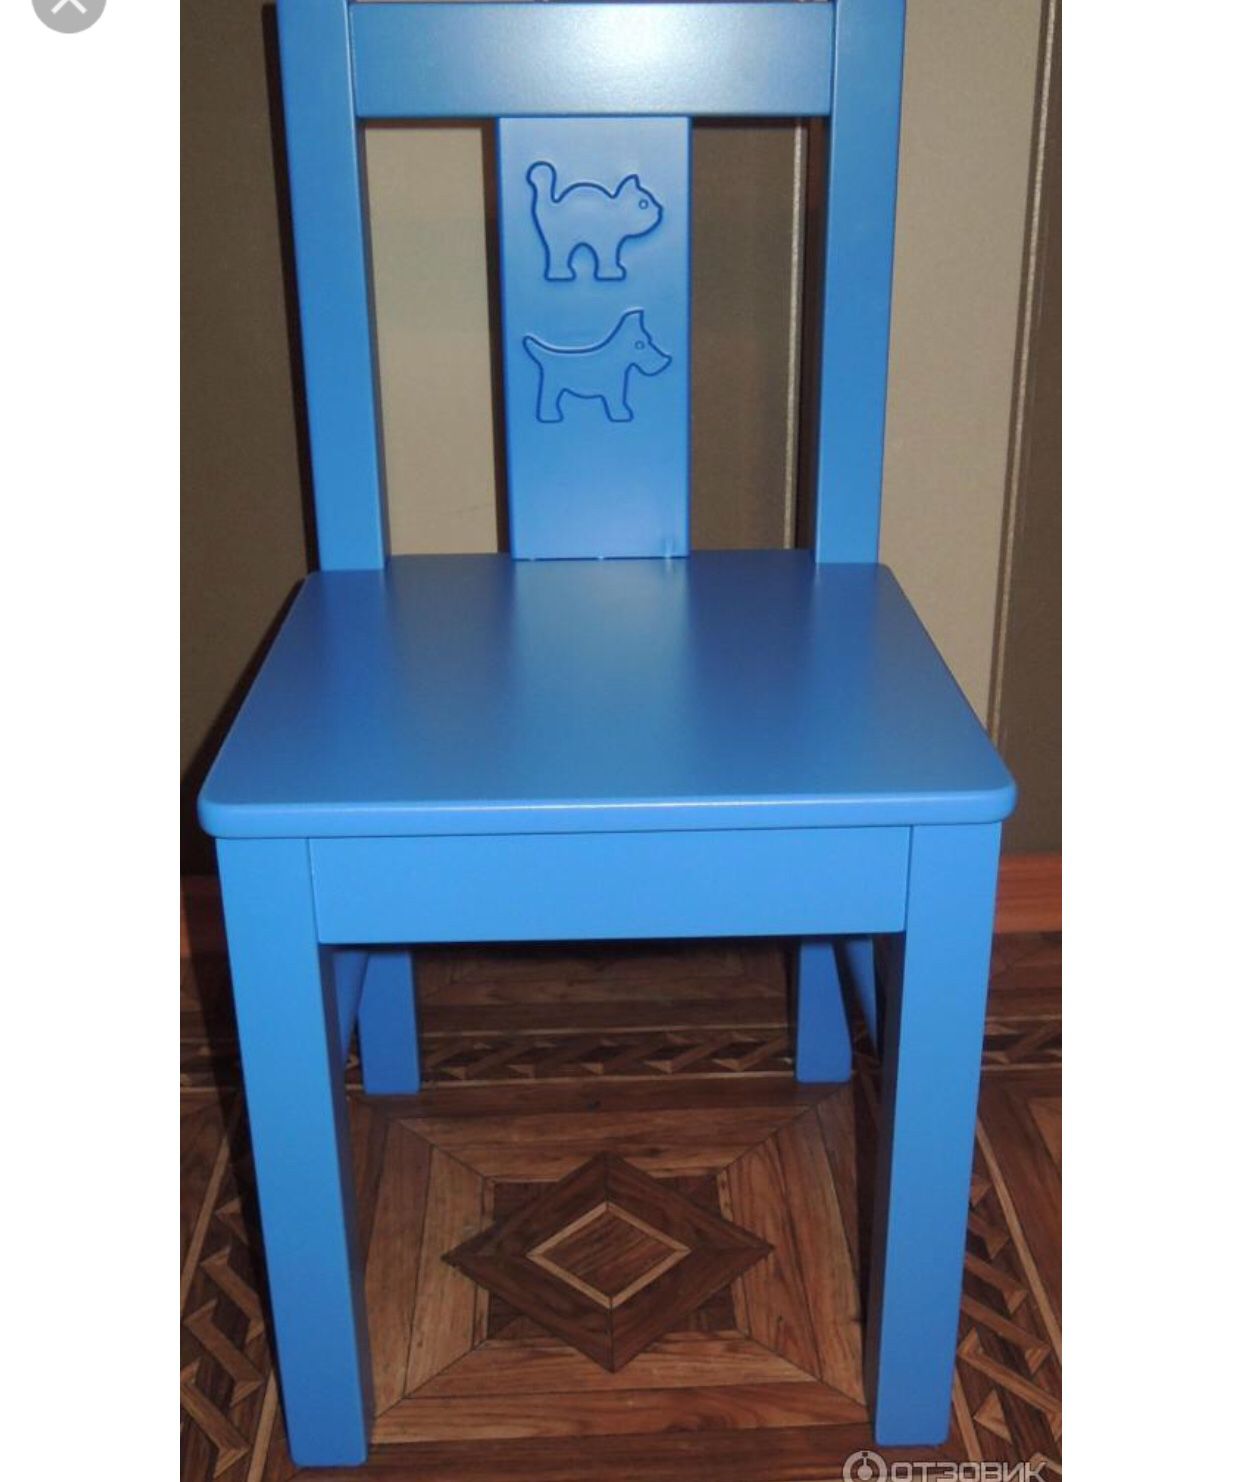 Kids chair . Brand new in box - blue